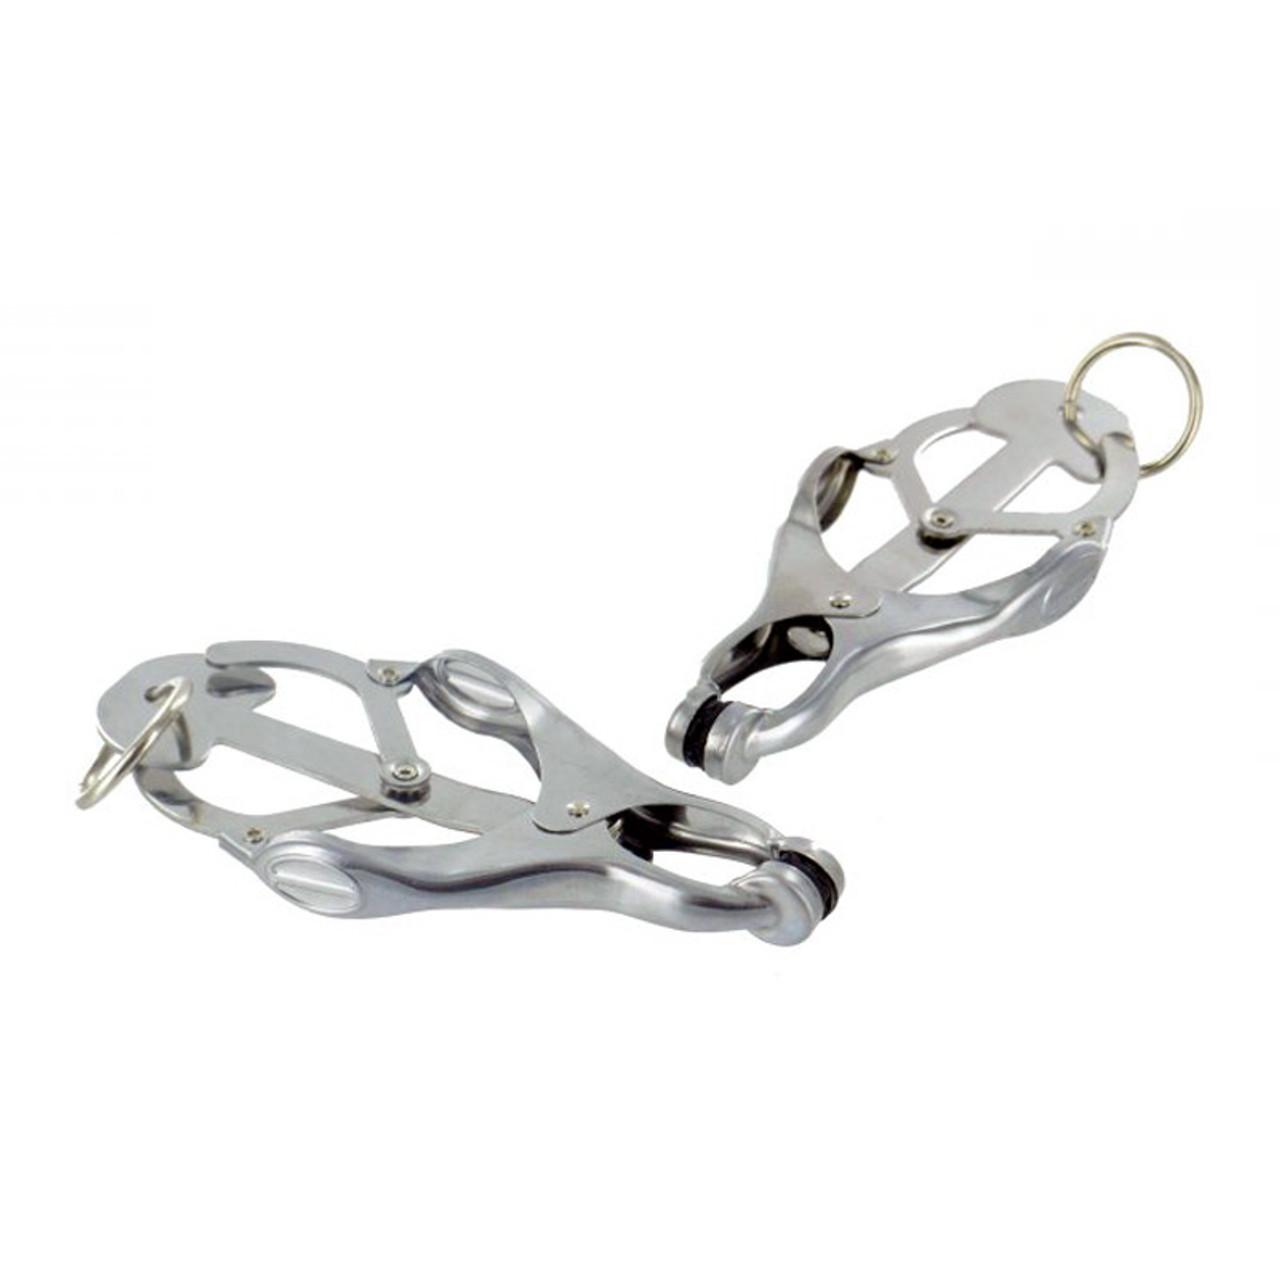 Buy the Deviant Monarch Weighted Ringed Clover-style Nipple Clamps with 8 oz Weights photo